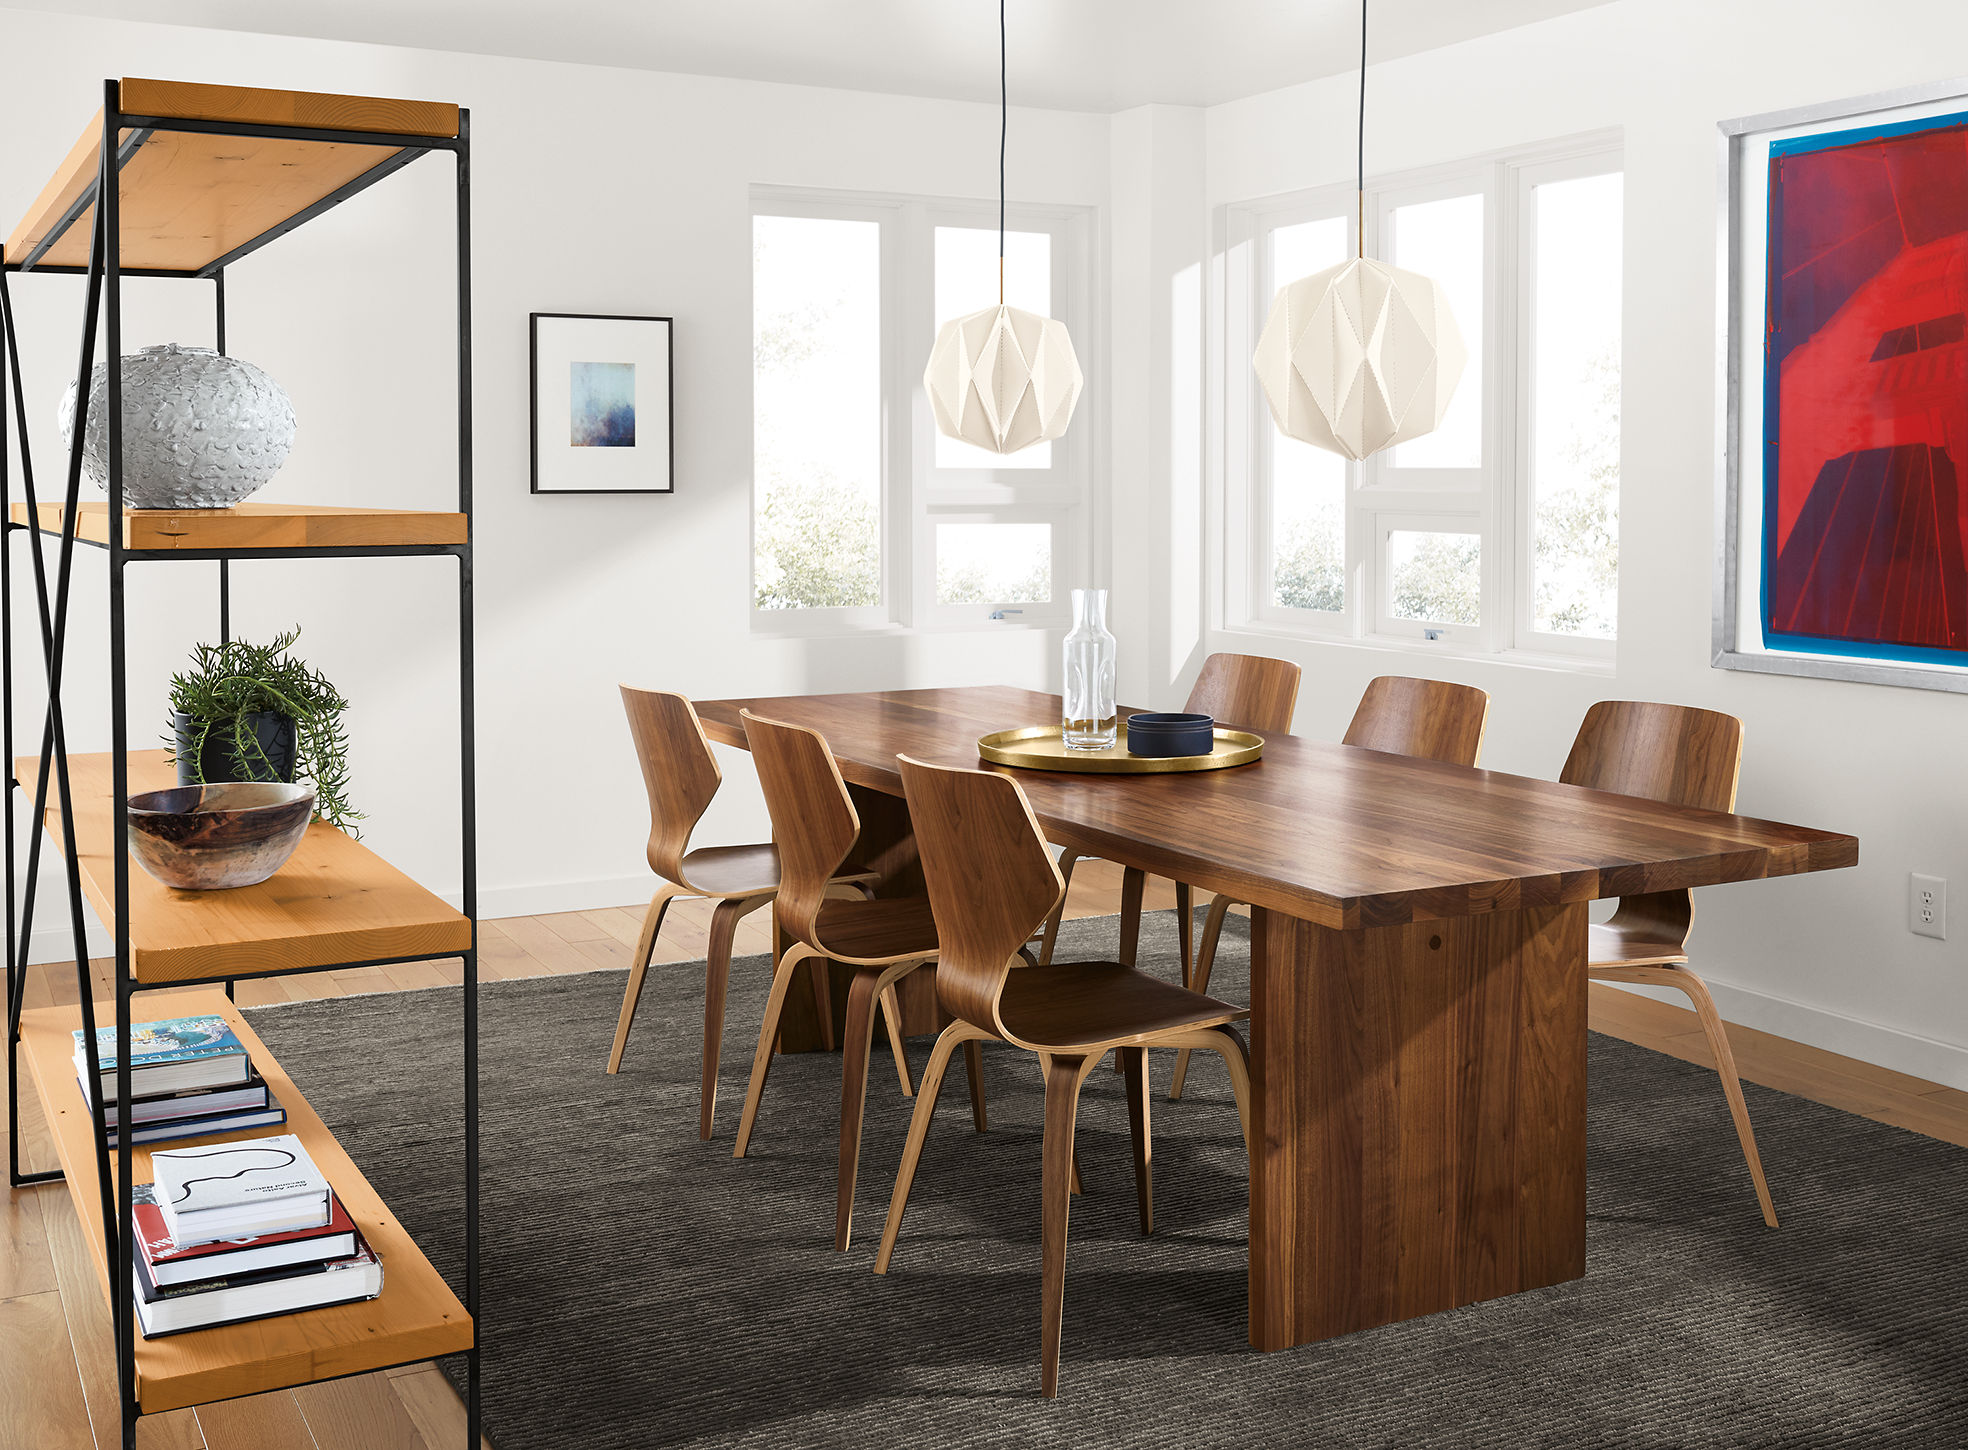 Keep the Conversation Flowing With These Great Modern Dining Sets.